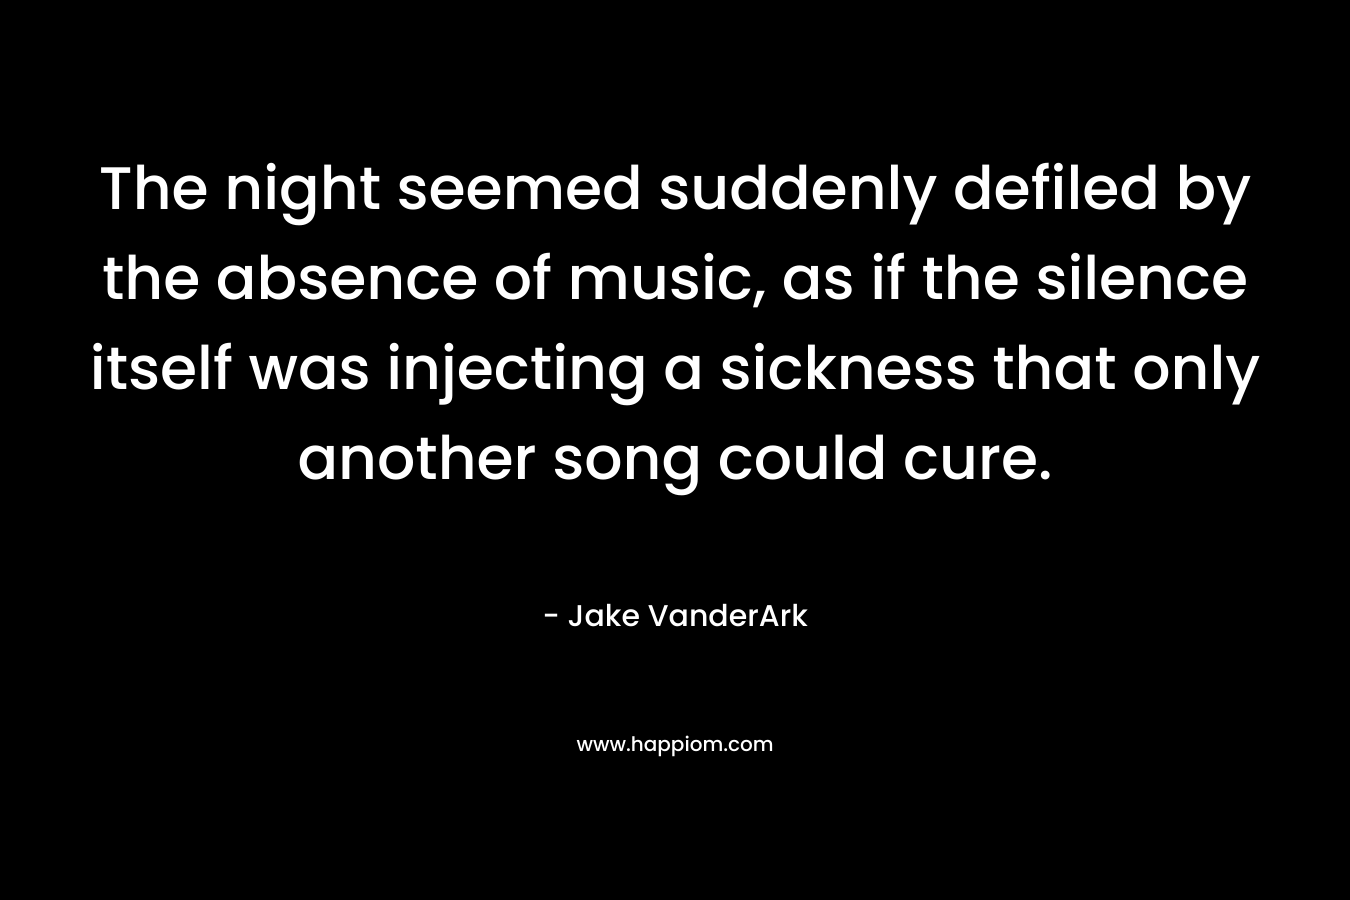 The night seemed suddenly defiled by the absence of music, as if the silence itself was injecting a sickness that only another song could cure. – Jake VanderArk